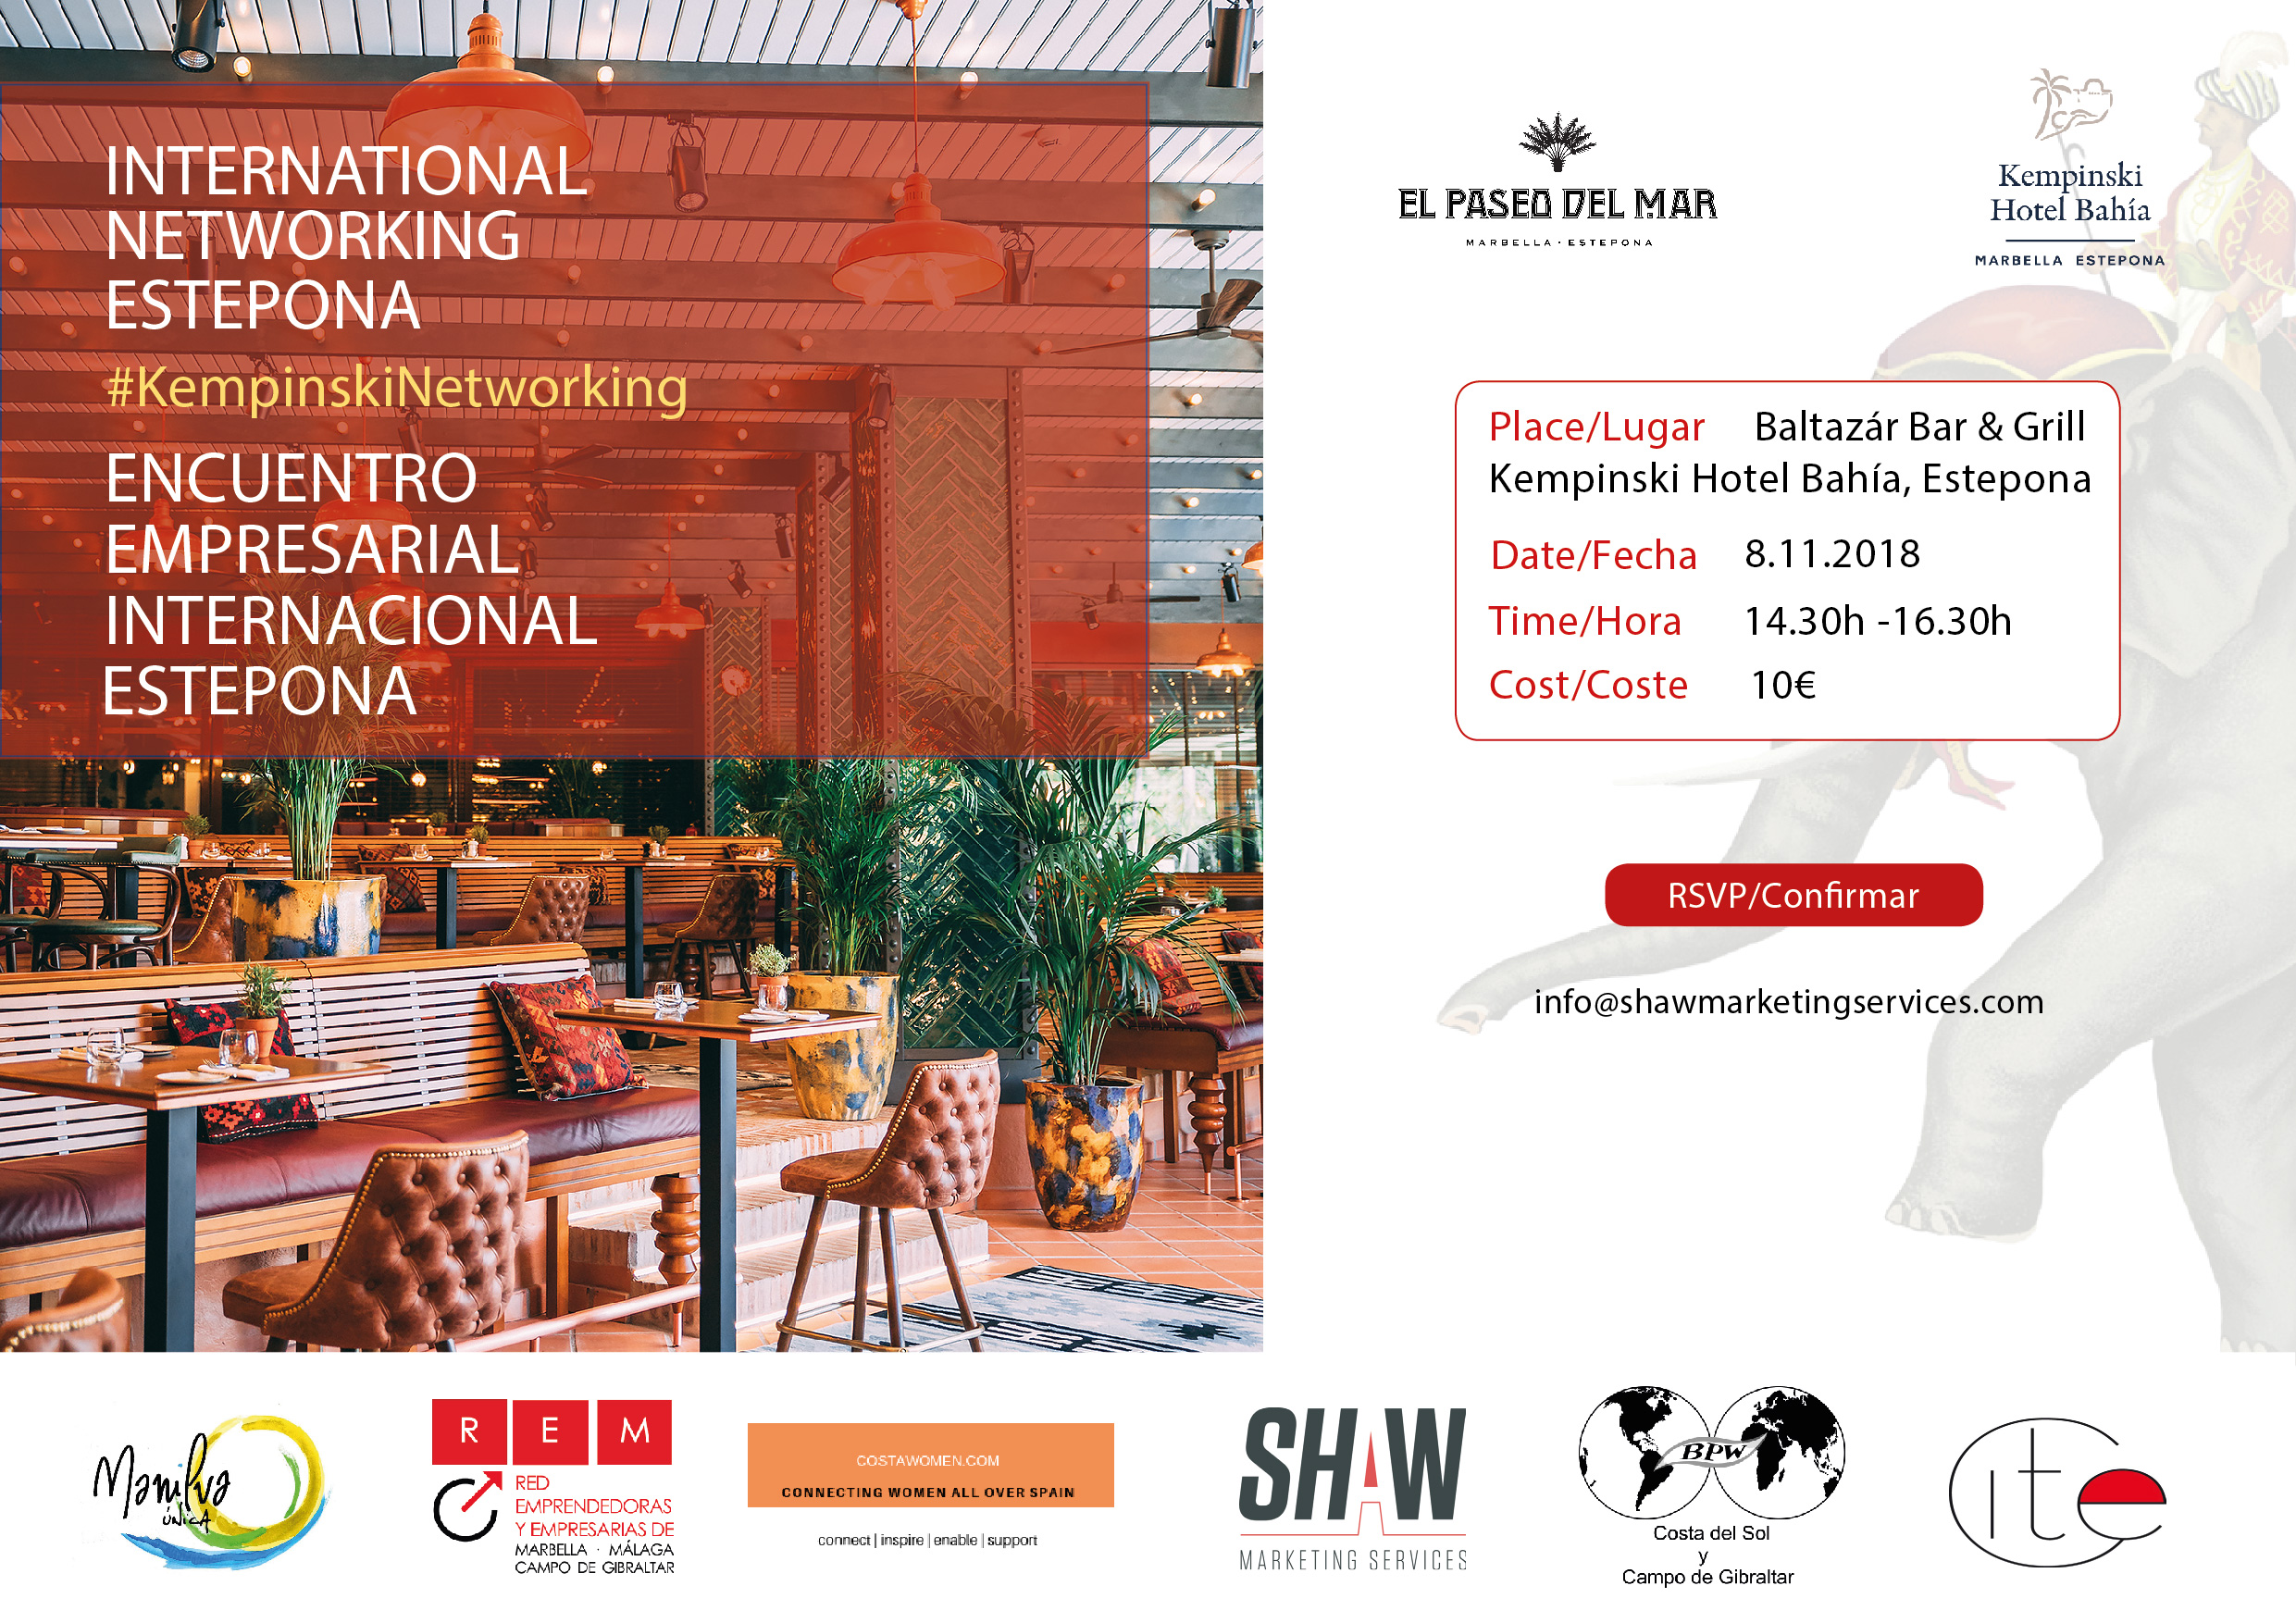 International Networking Groups come together at the Kempinski Hotel Bahía